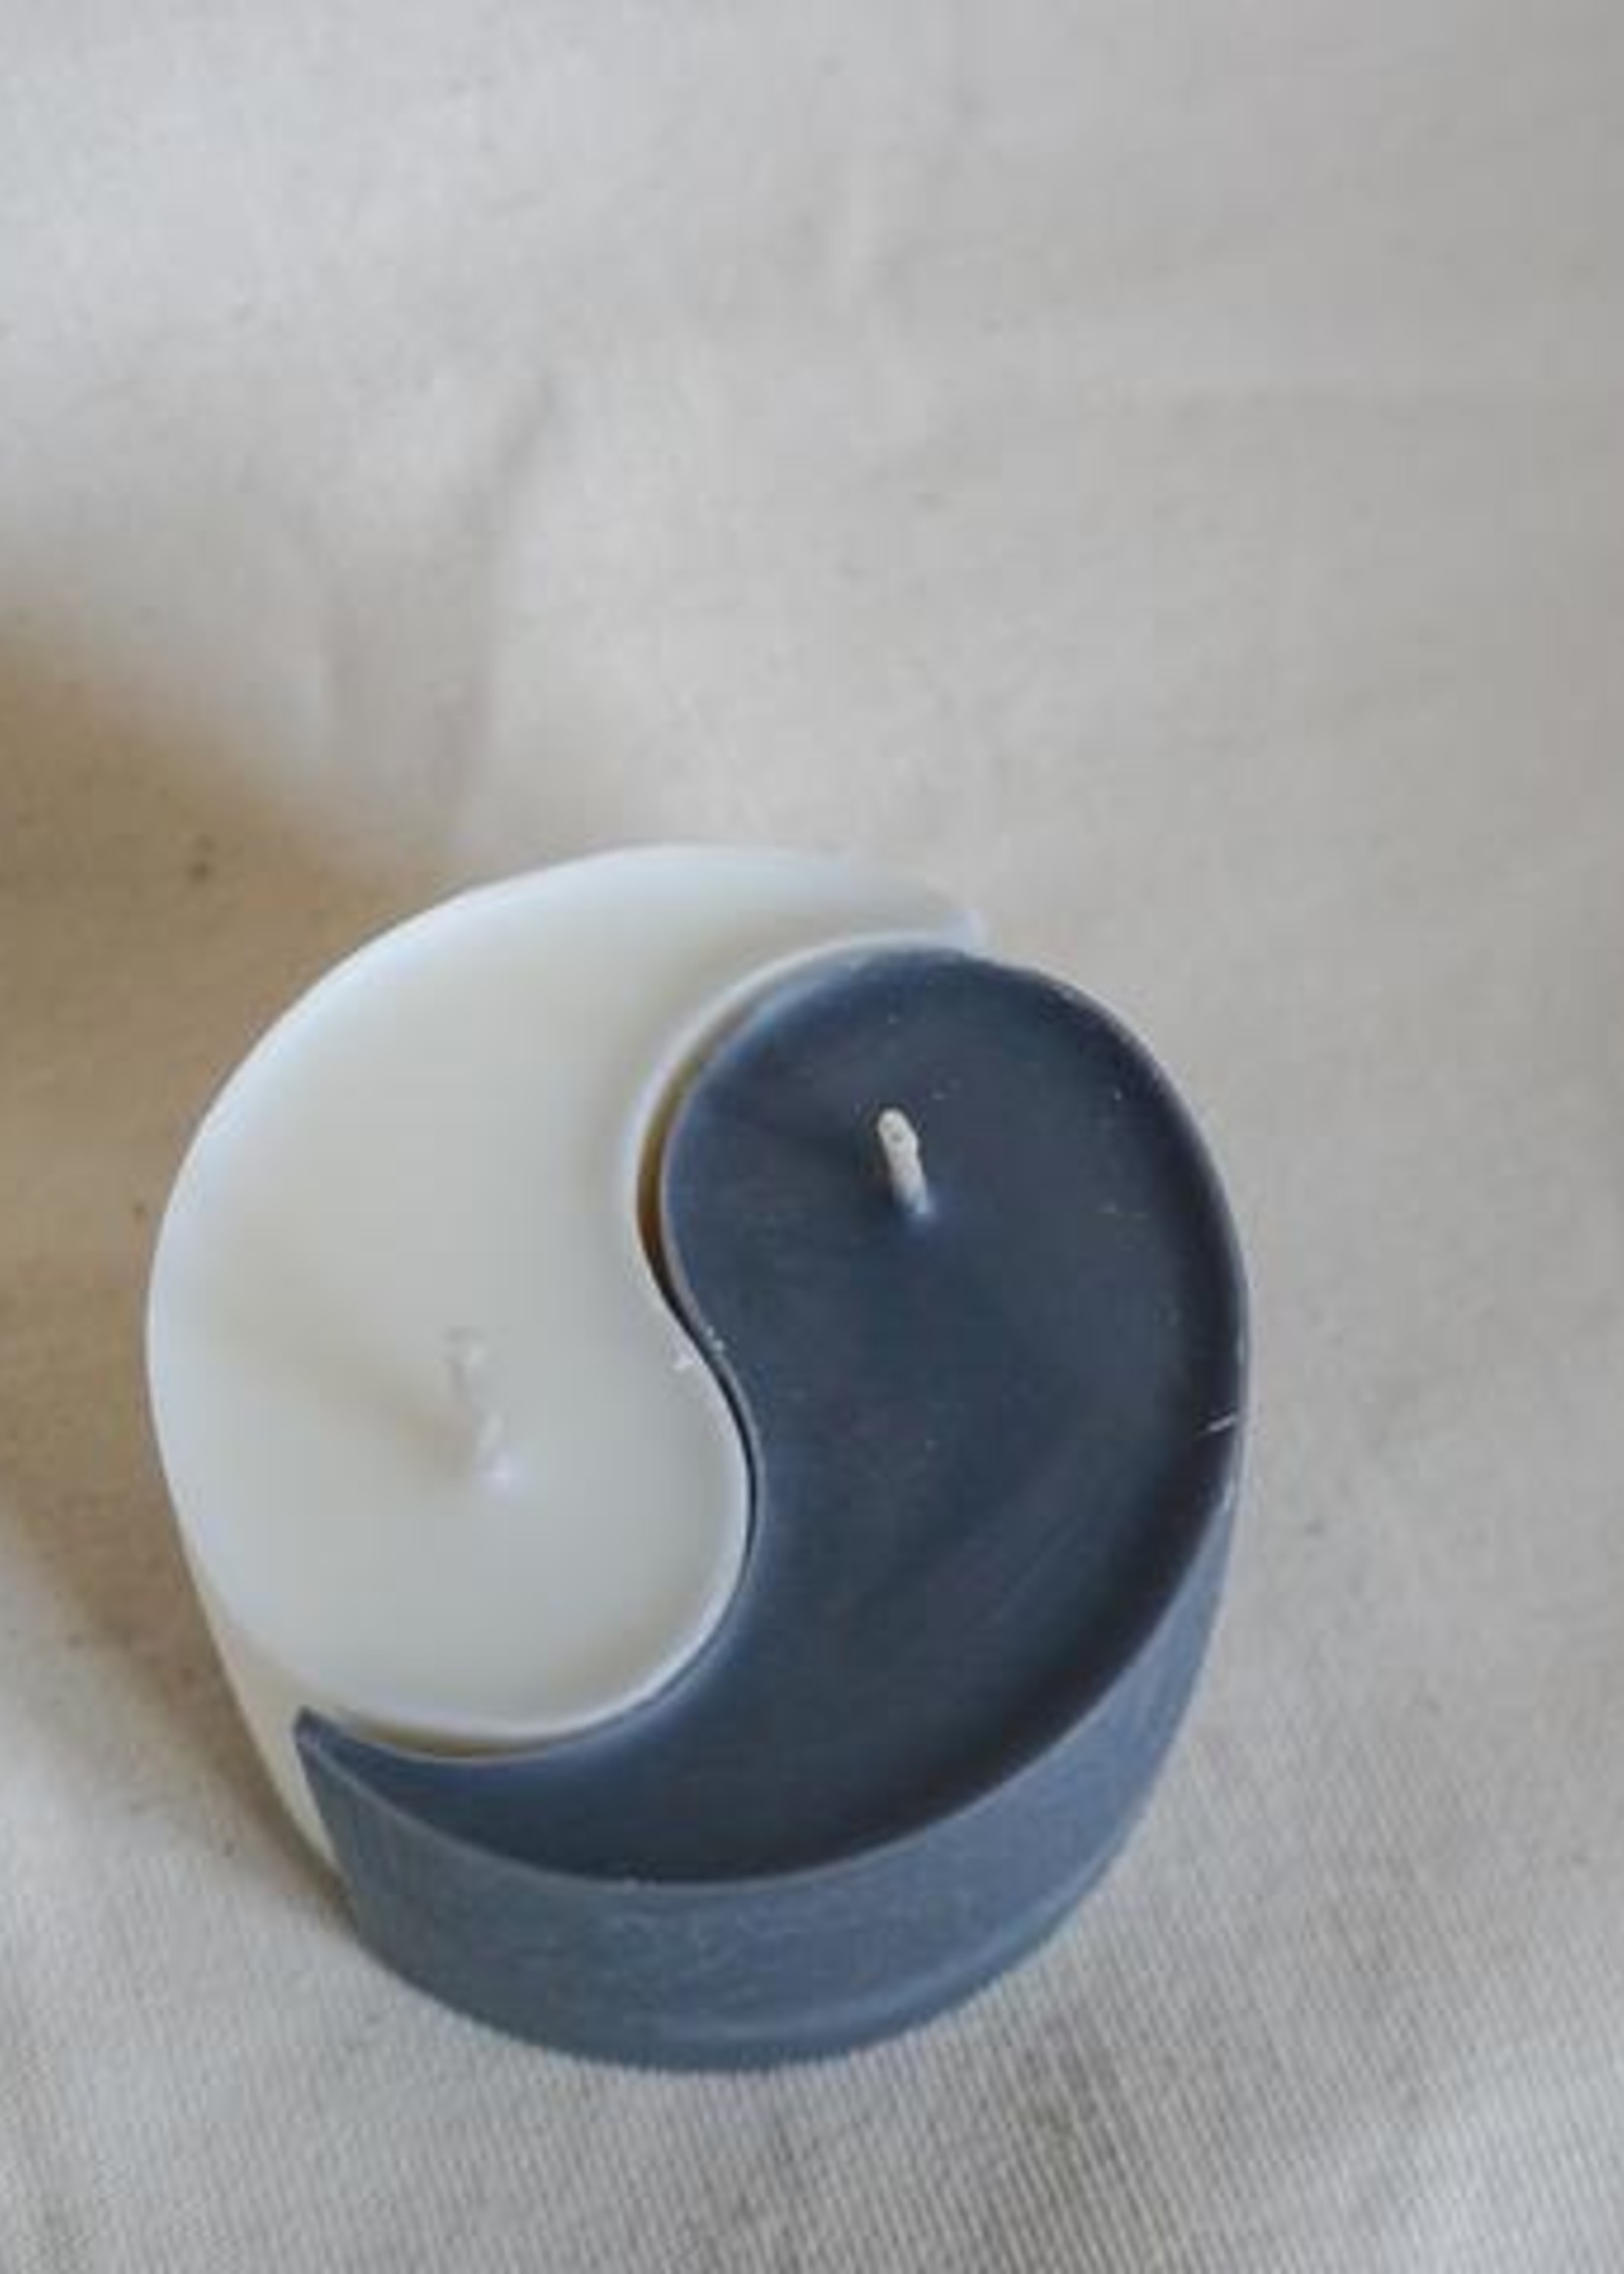 For Love Club Ying Yang Candle Set